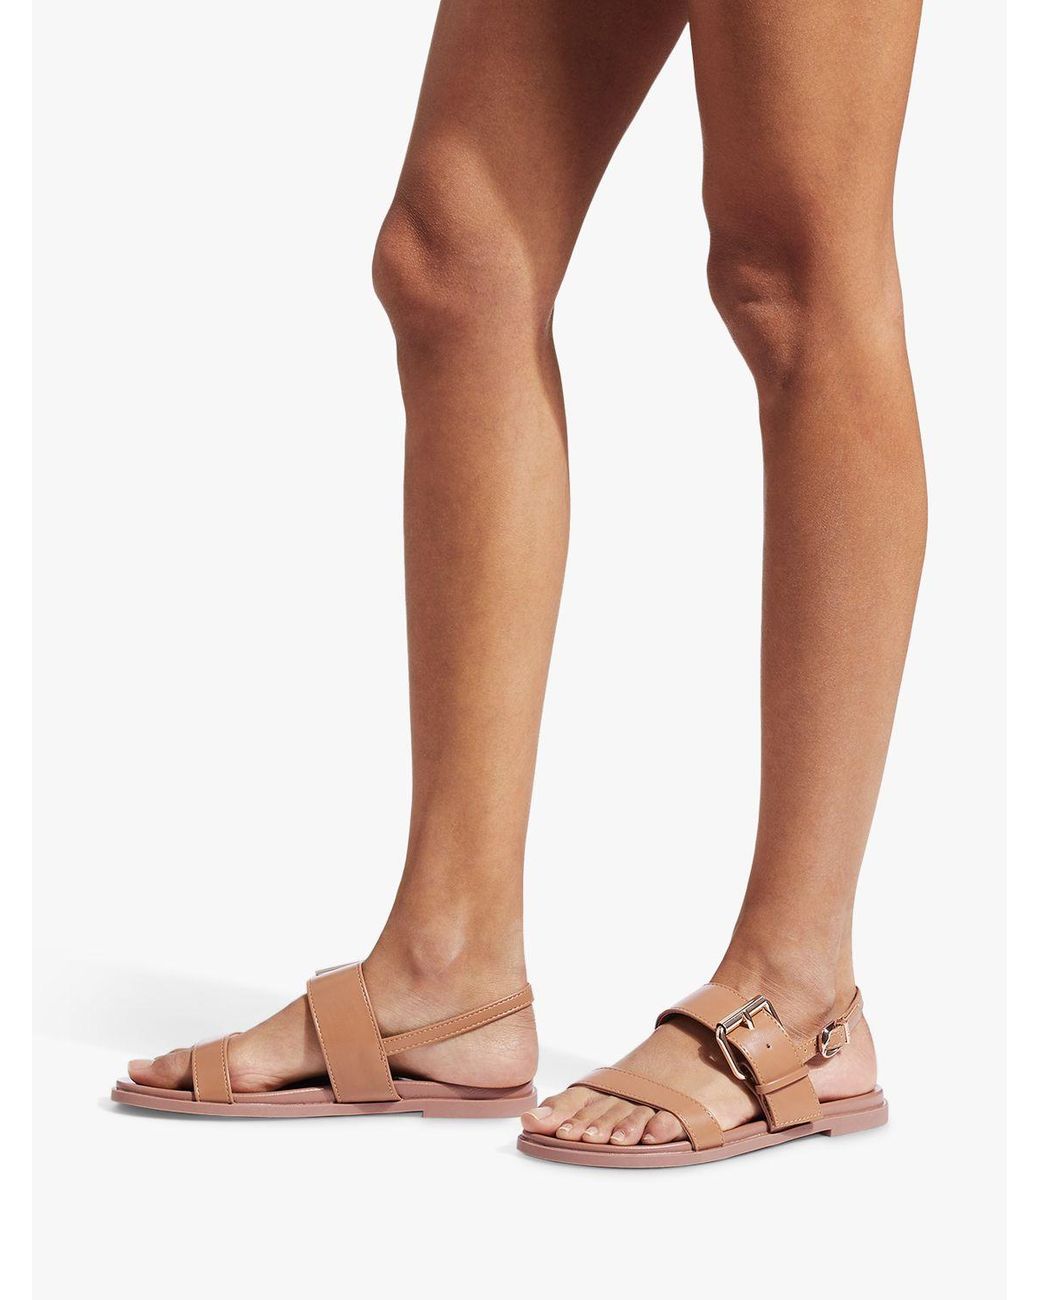 Why are we slaves to gladiator sandals?